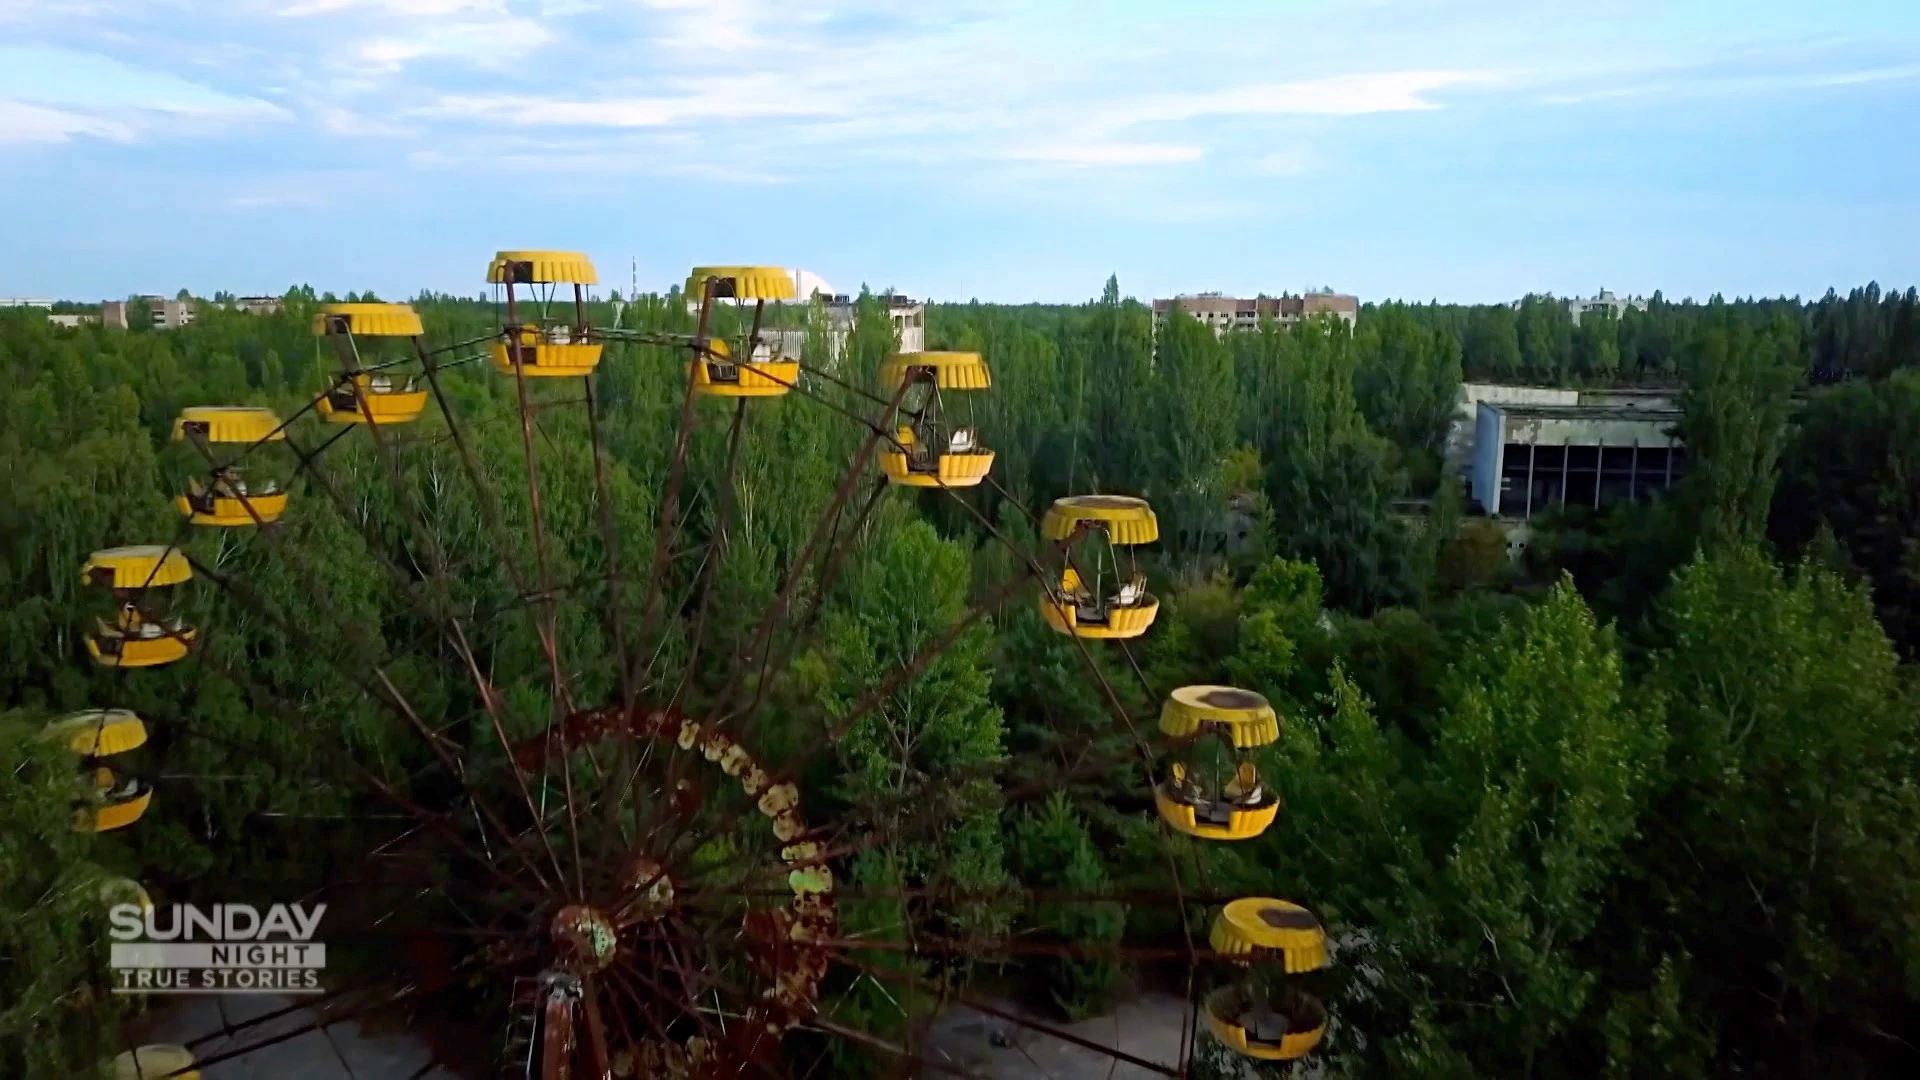 Pripyat remains eerily quiet following the Chernobyl nuclear accident over 30 years earlier.